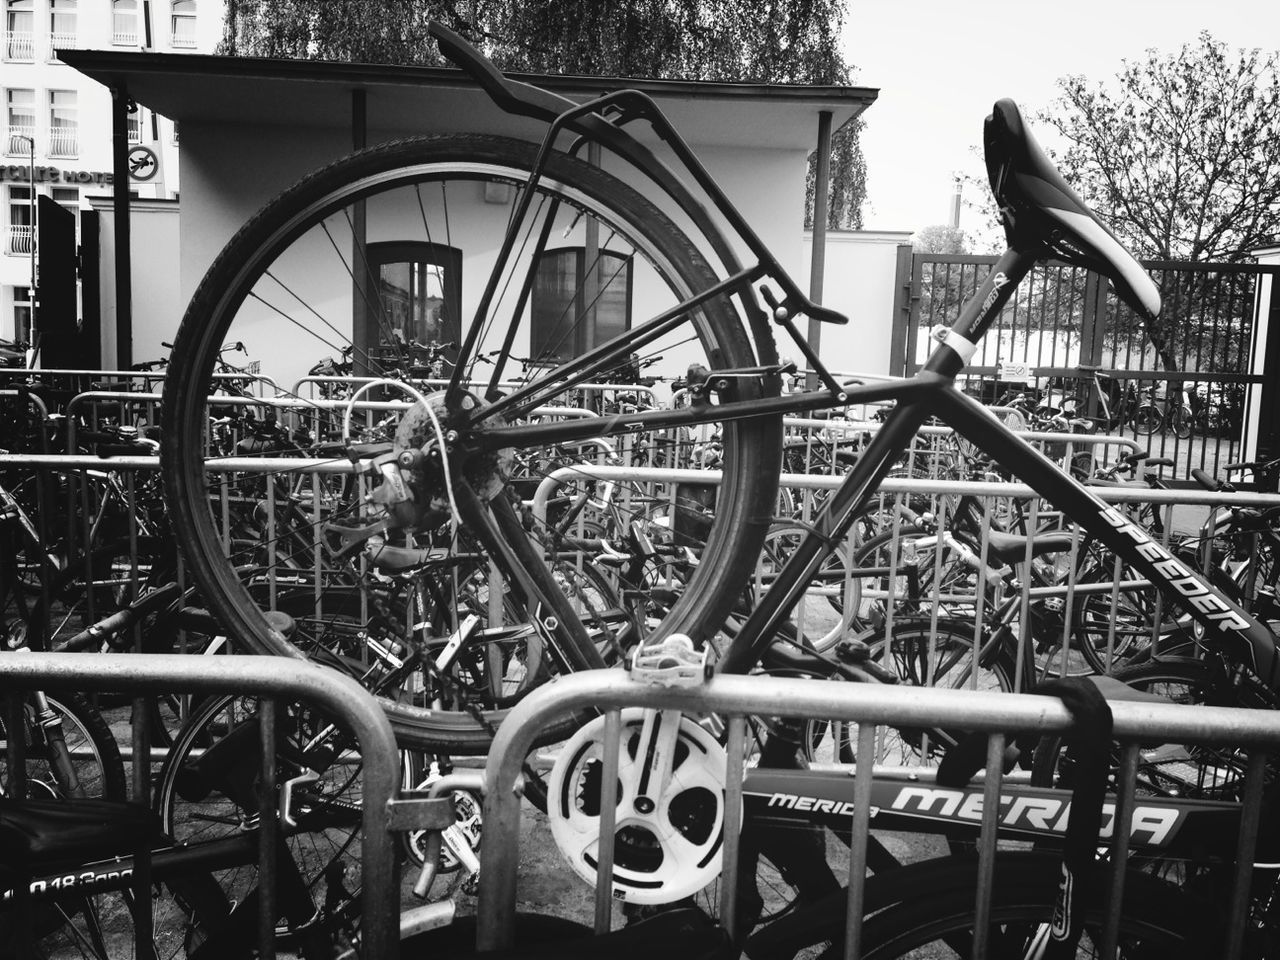 bicycle, transportation, mode of transport, land vehicle, metal, wheel, stationary, metallic, day, built structure, part of, parked, outdoors, parking, no people, railing, close-up, architecture, travel, cropped